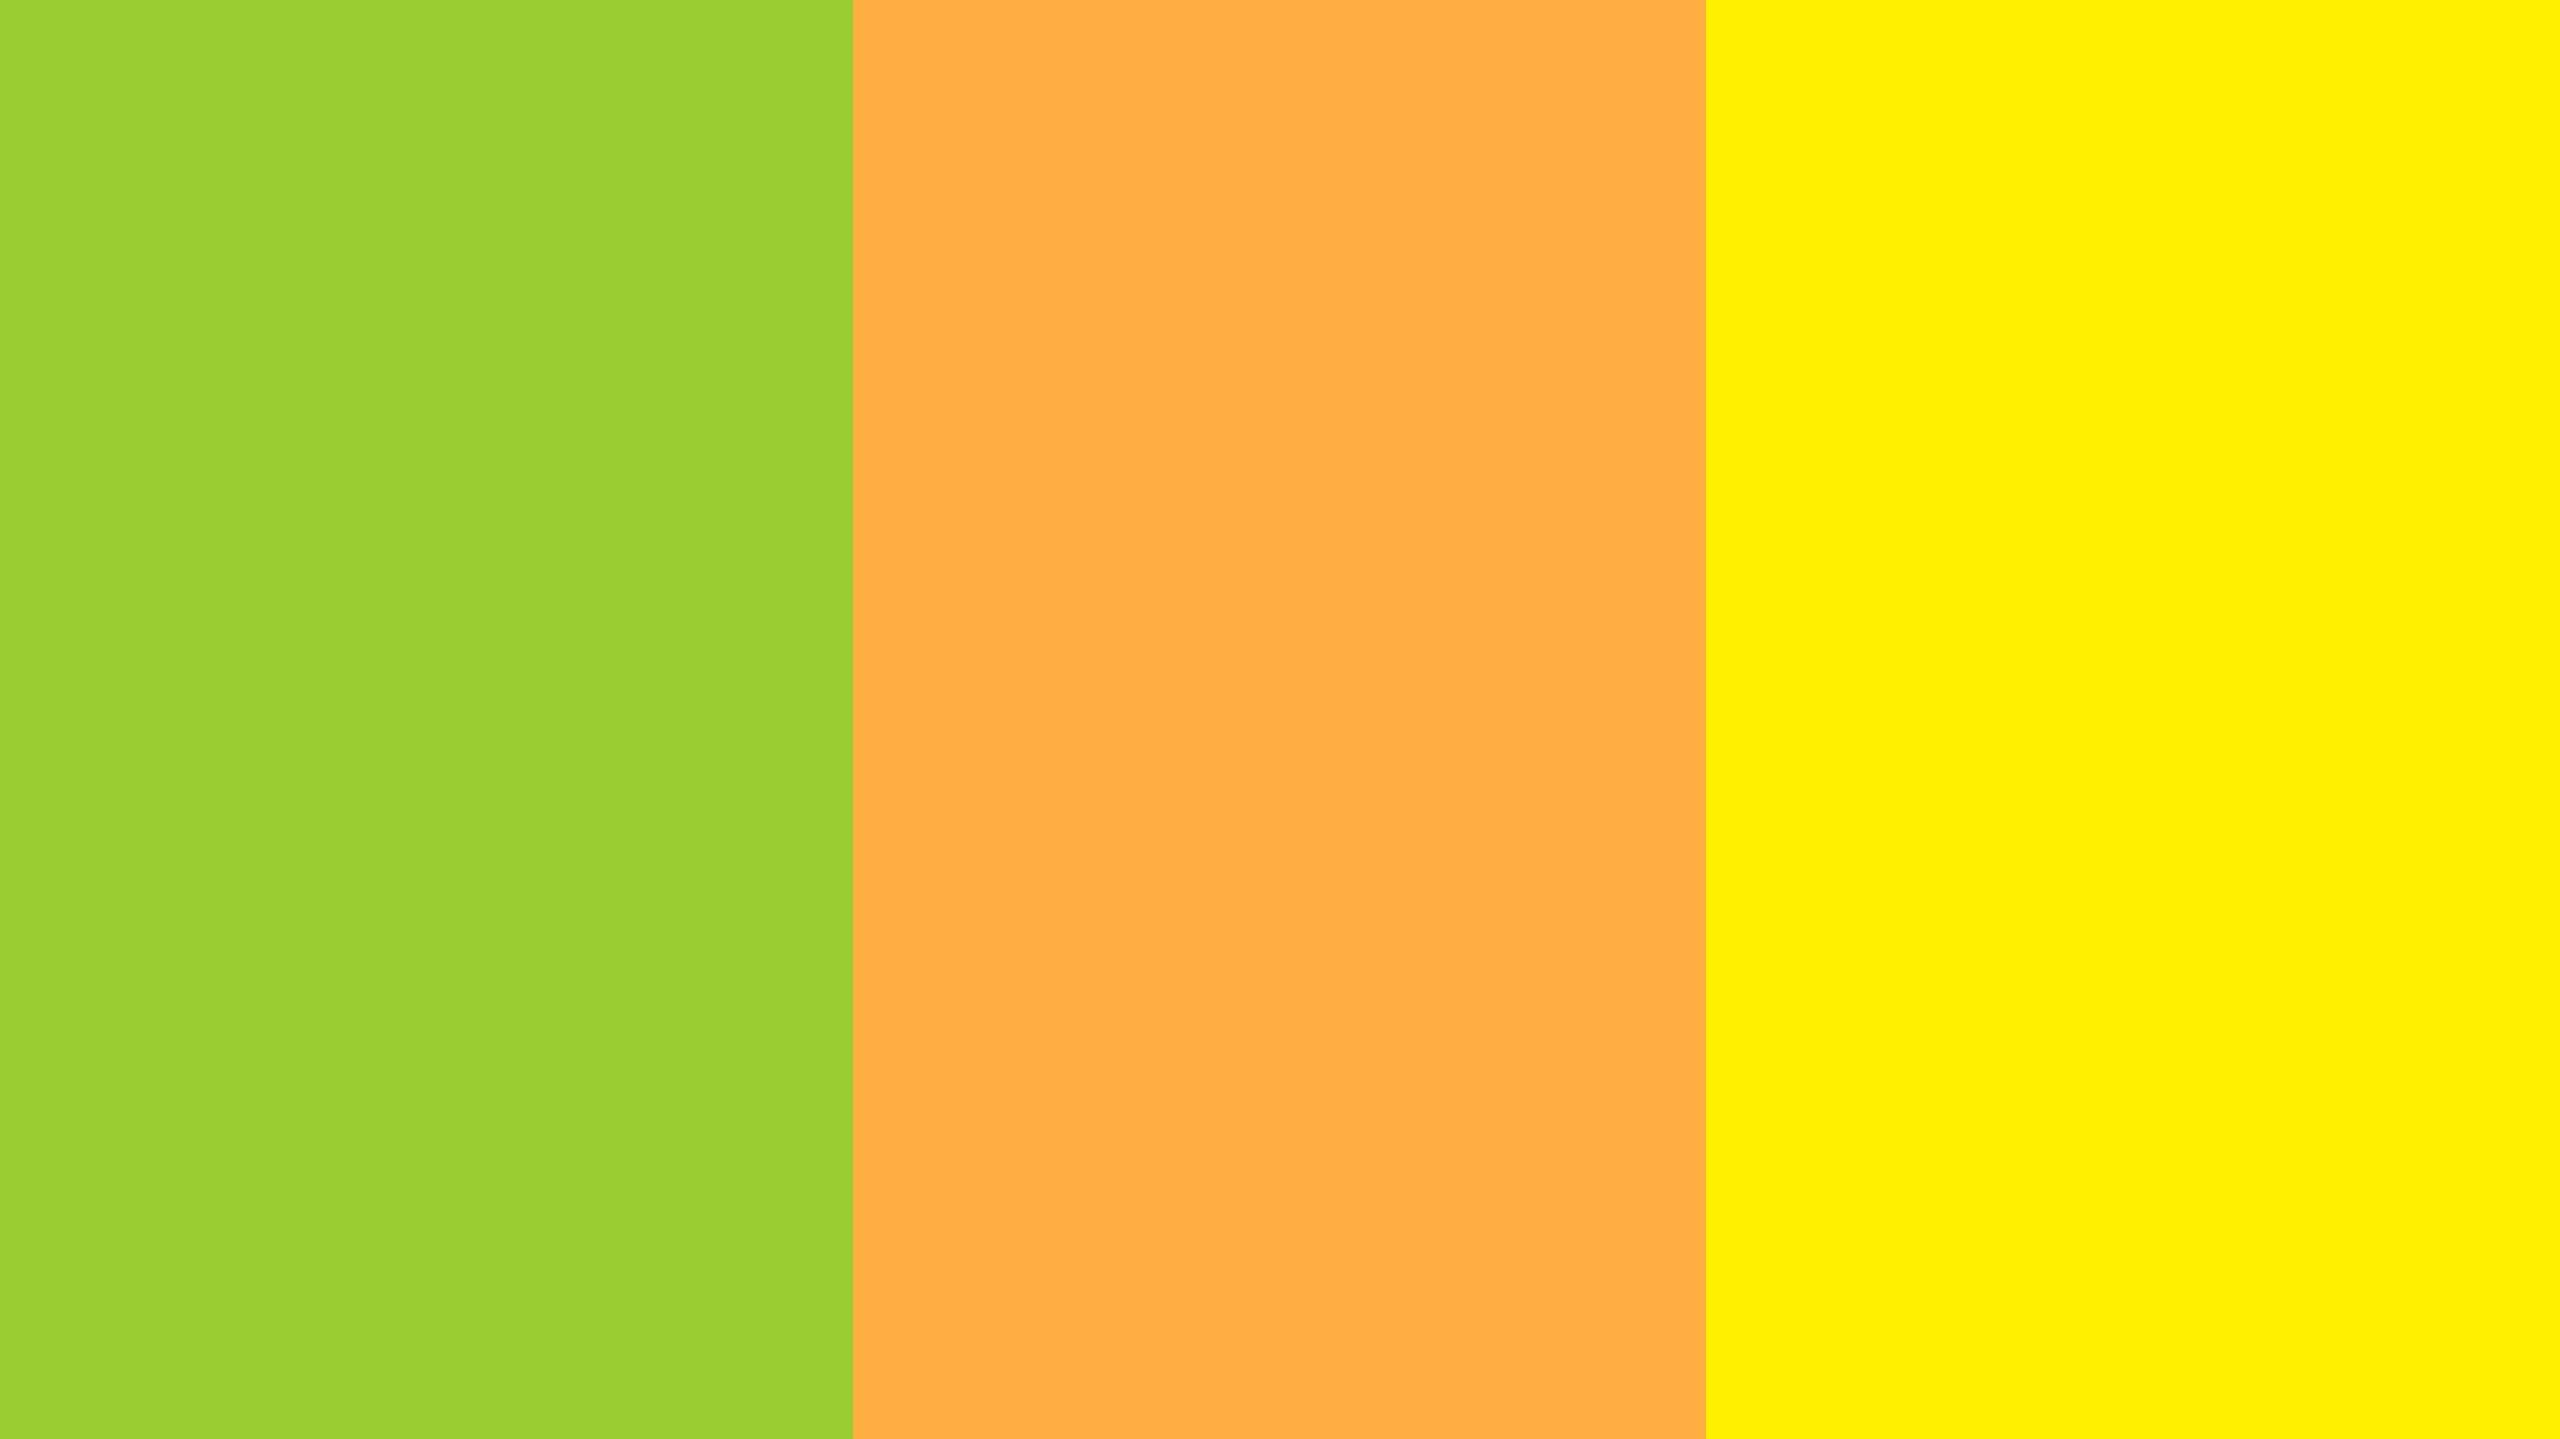 Free download green yellow orange and yellow rose solid three